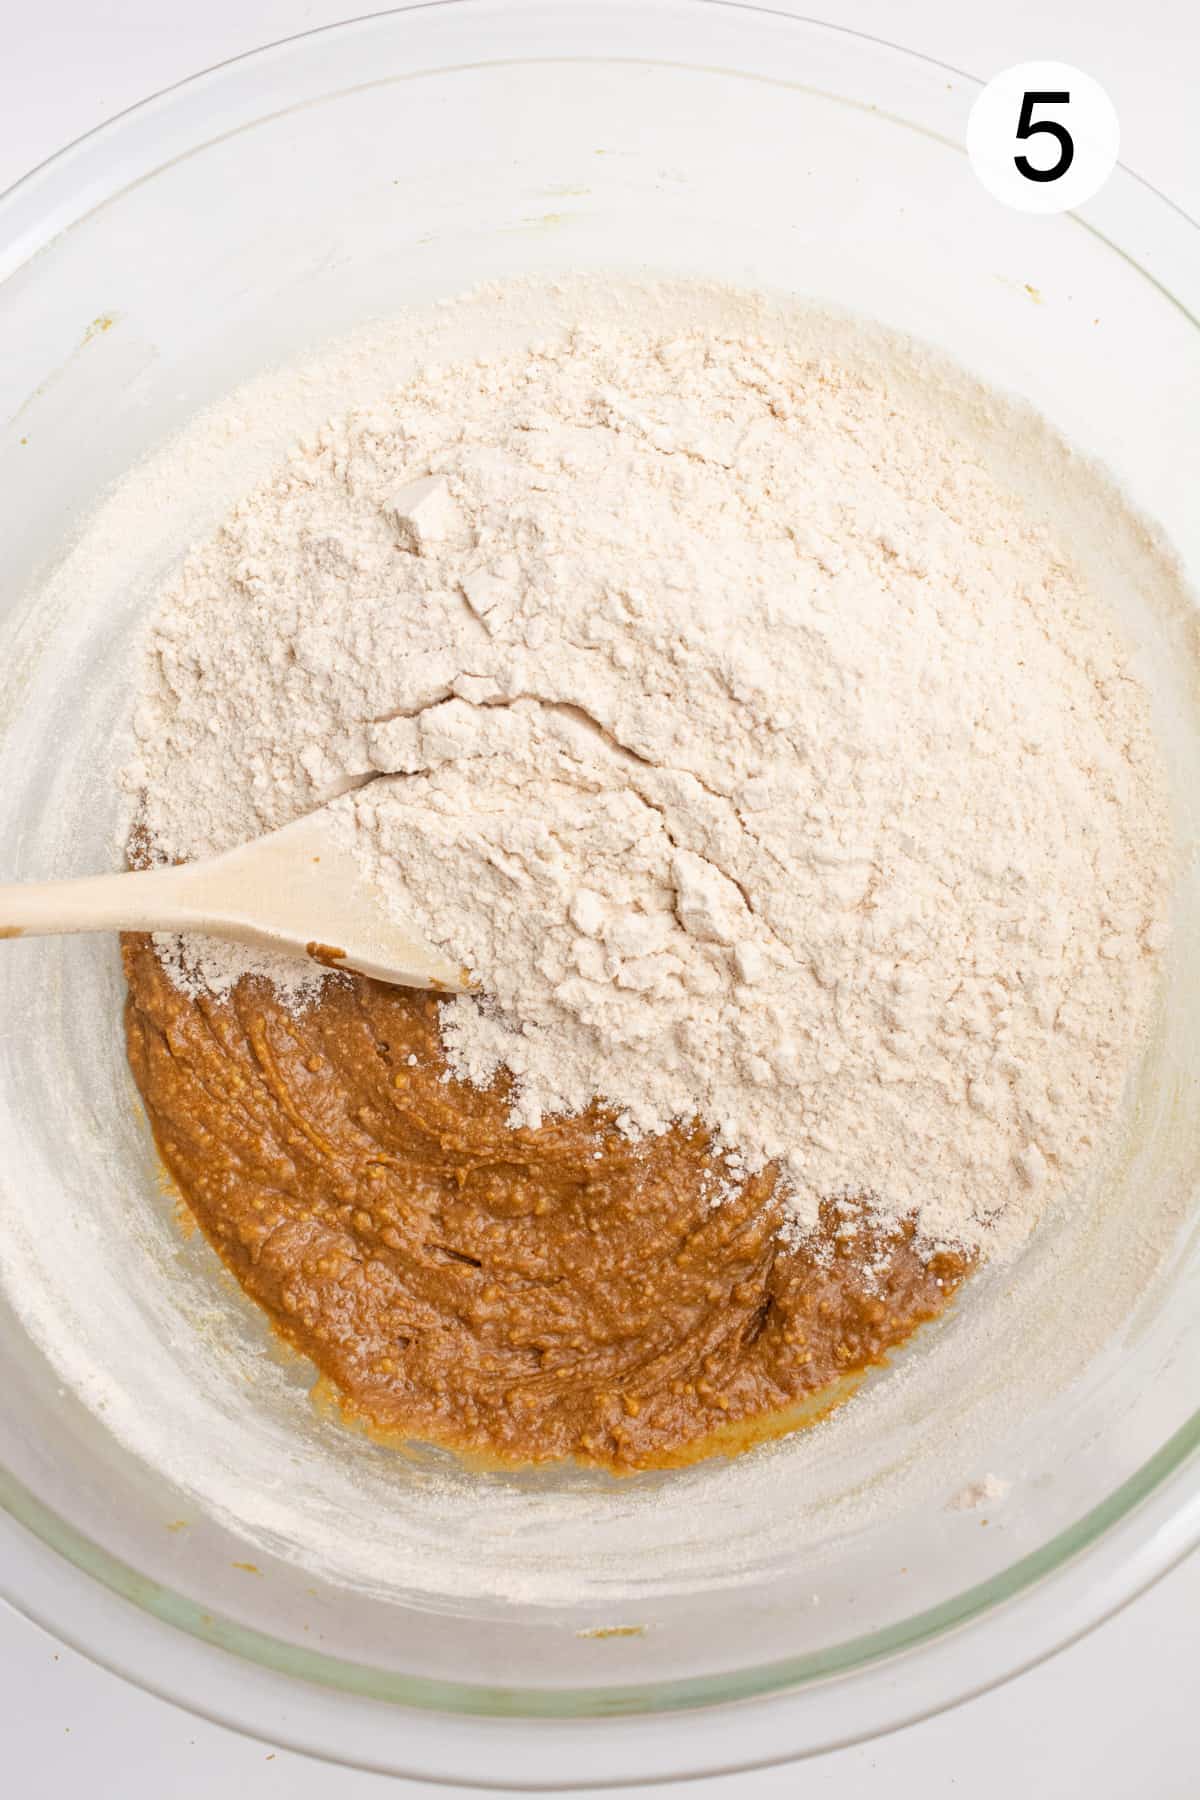 Flour being added to a bowl.